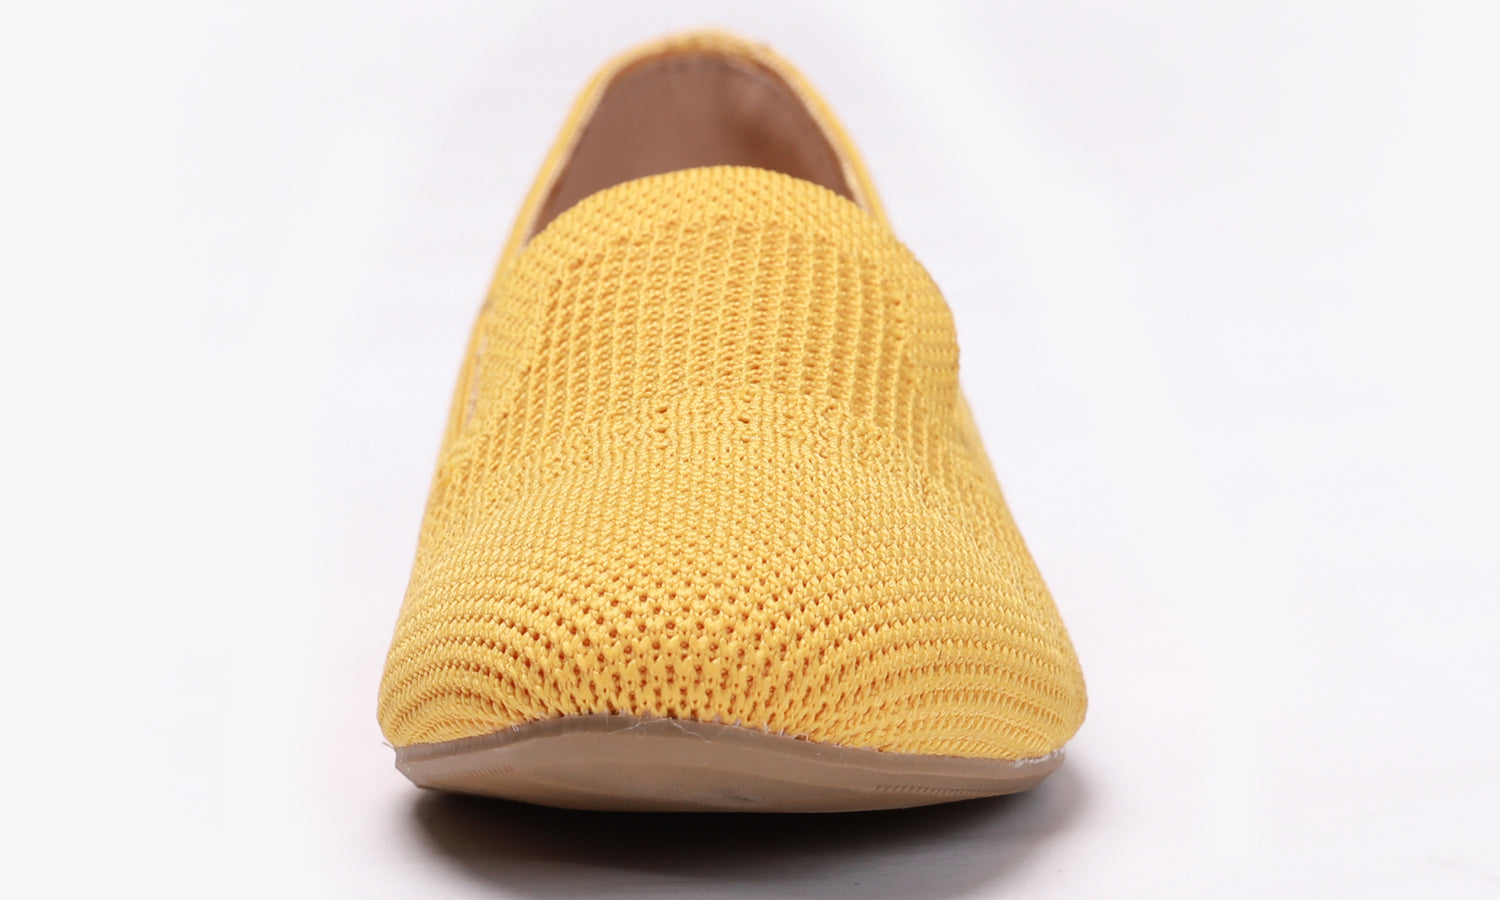 Feversole Women's Woven Fashion Breathable Knit Flat Shoes Yellow Loafer